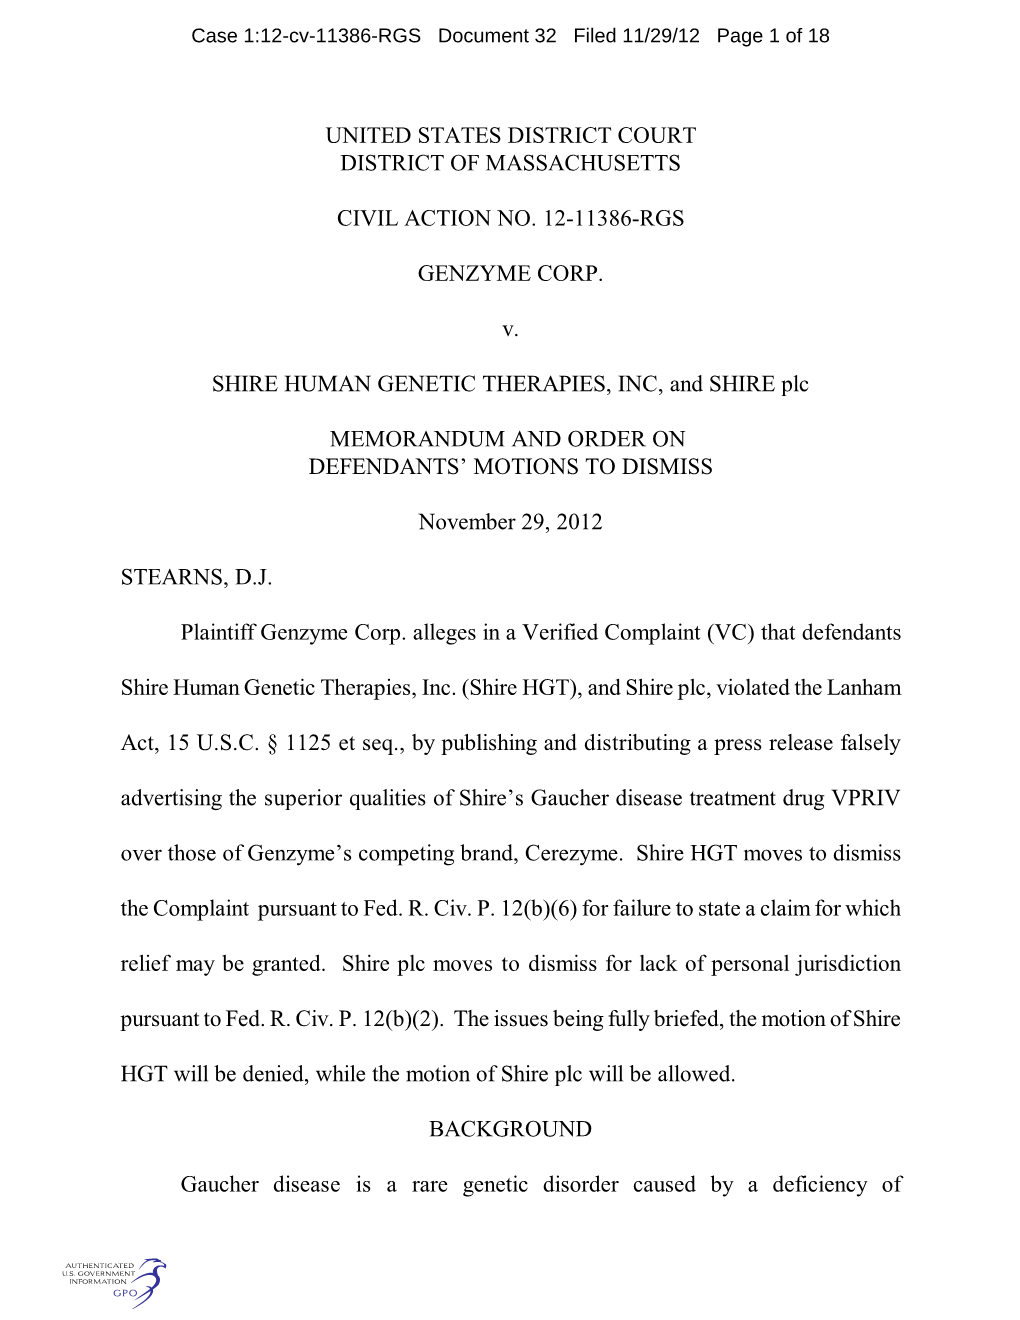 UNITED STATES DISTRICT COURT DISTRICT of MASSACHUSETTS CIVIL ACTION NO. 12-11386-RGS GENZYME CORP. V. SHIRE HUMAN GENETIC THERAP